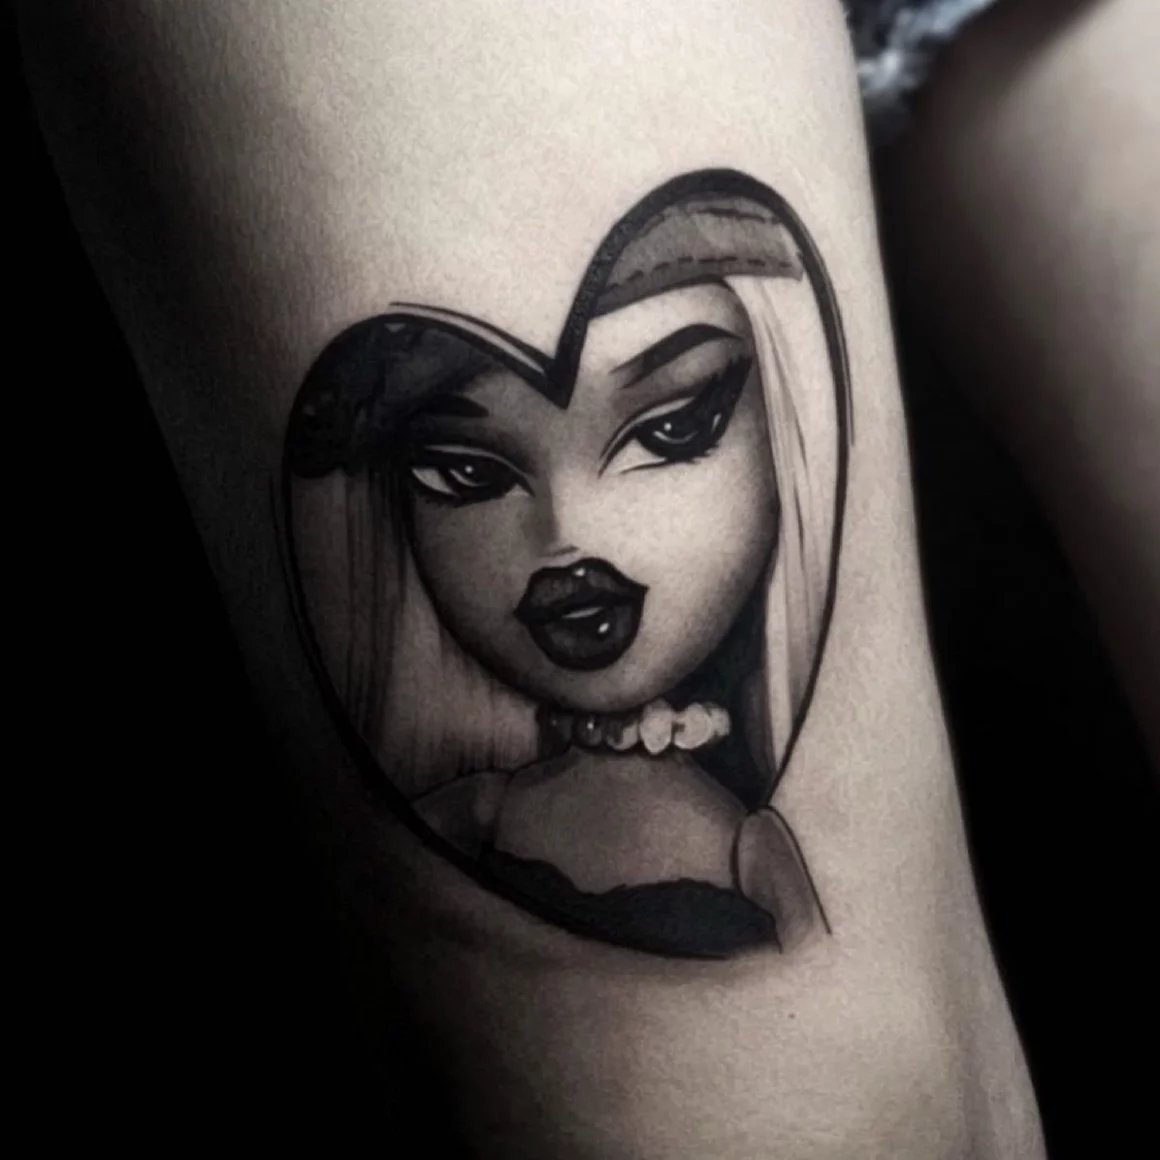 Barbie Tattoos: A Celebration of the Iconic Doll